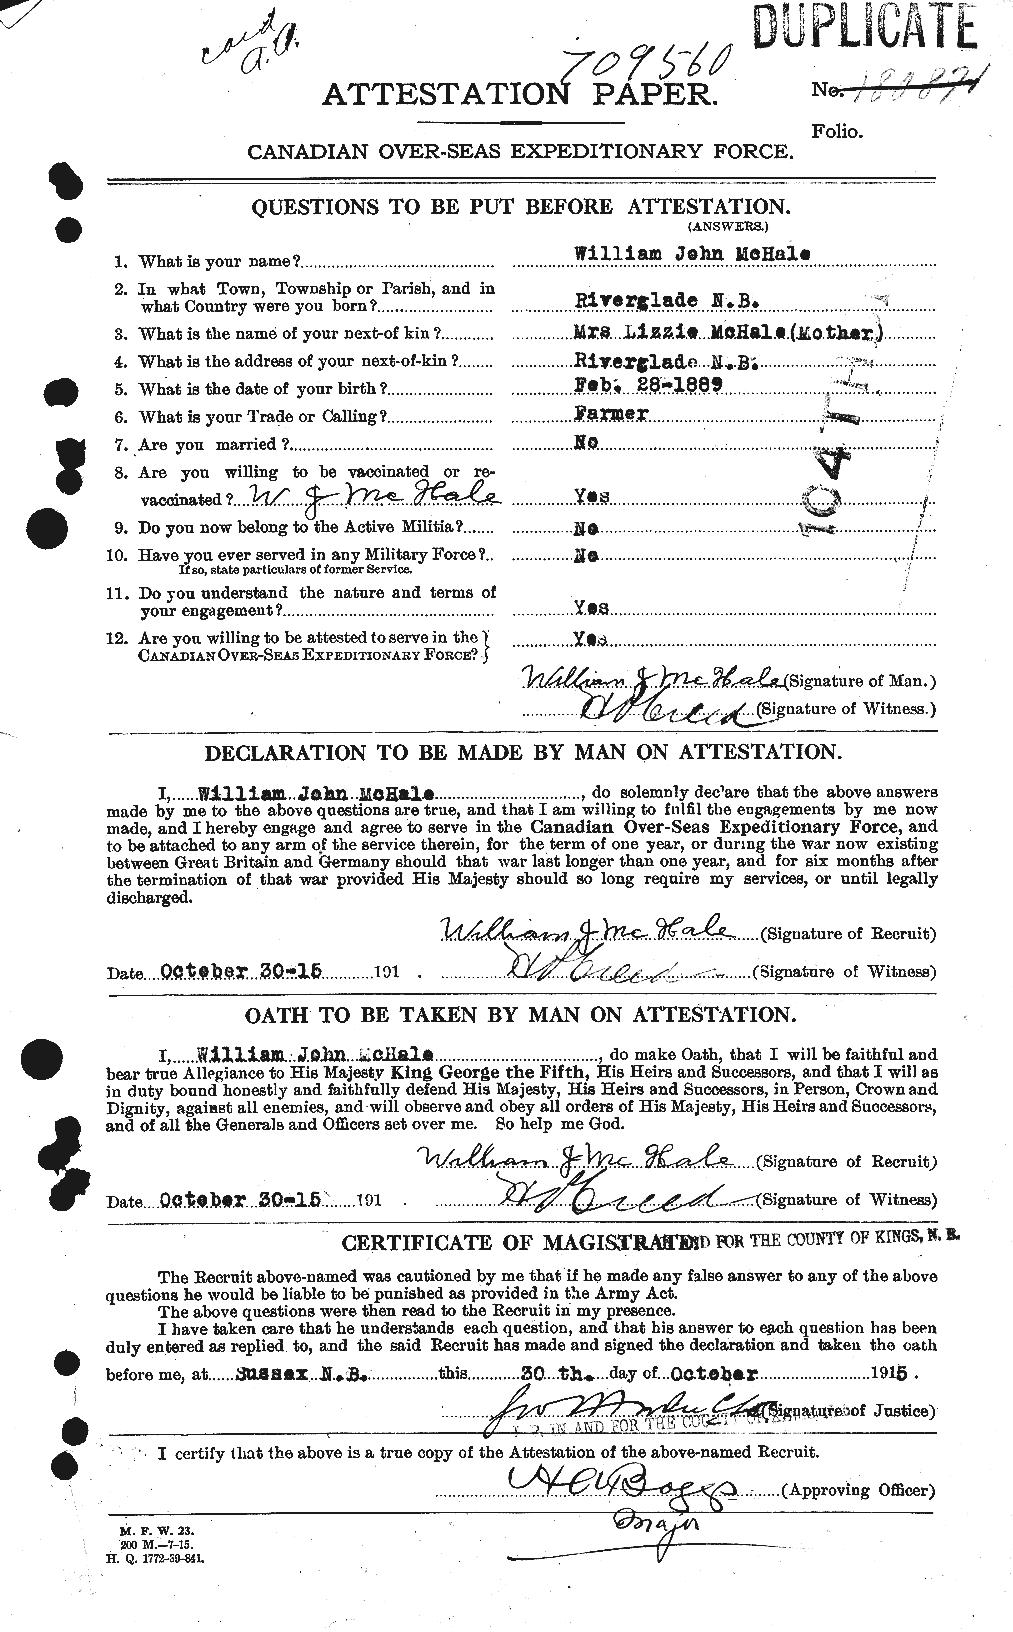 Personnel Records of the First World War - CEF 524223a